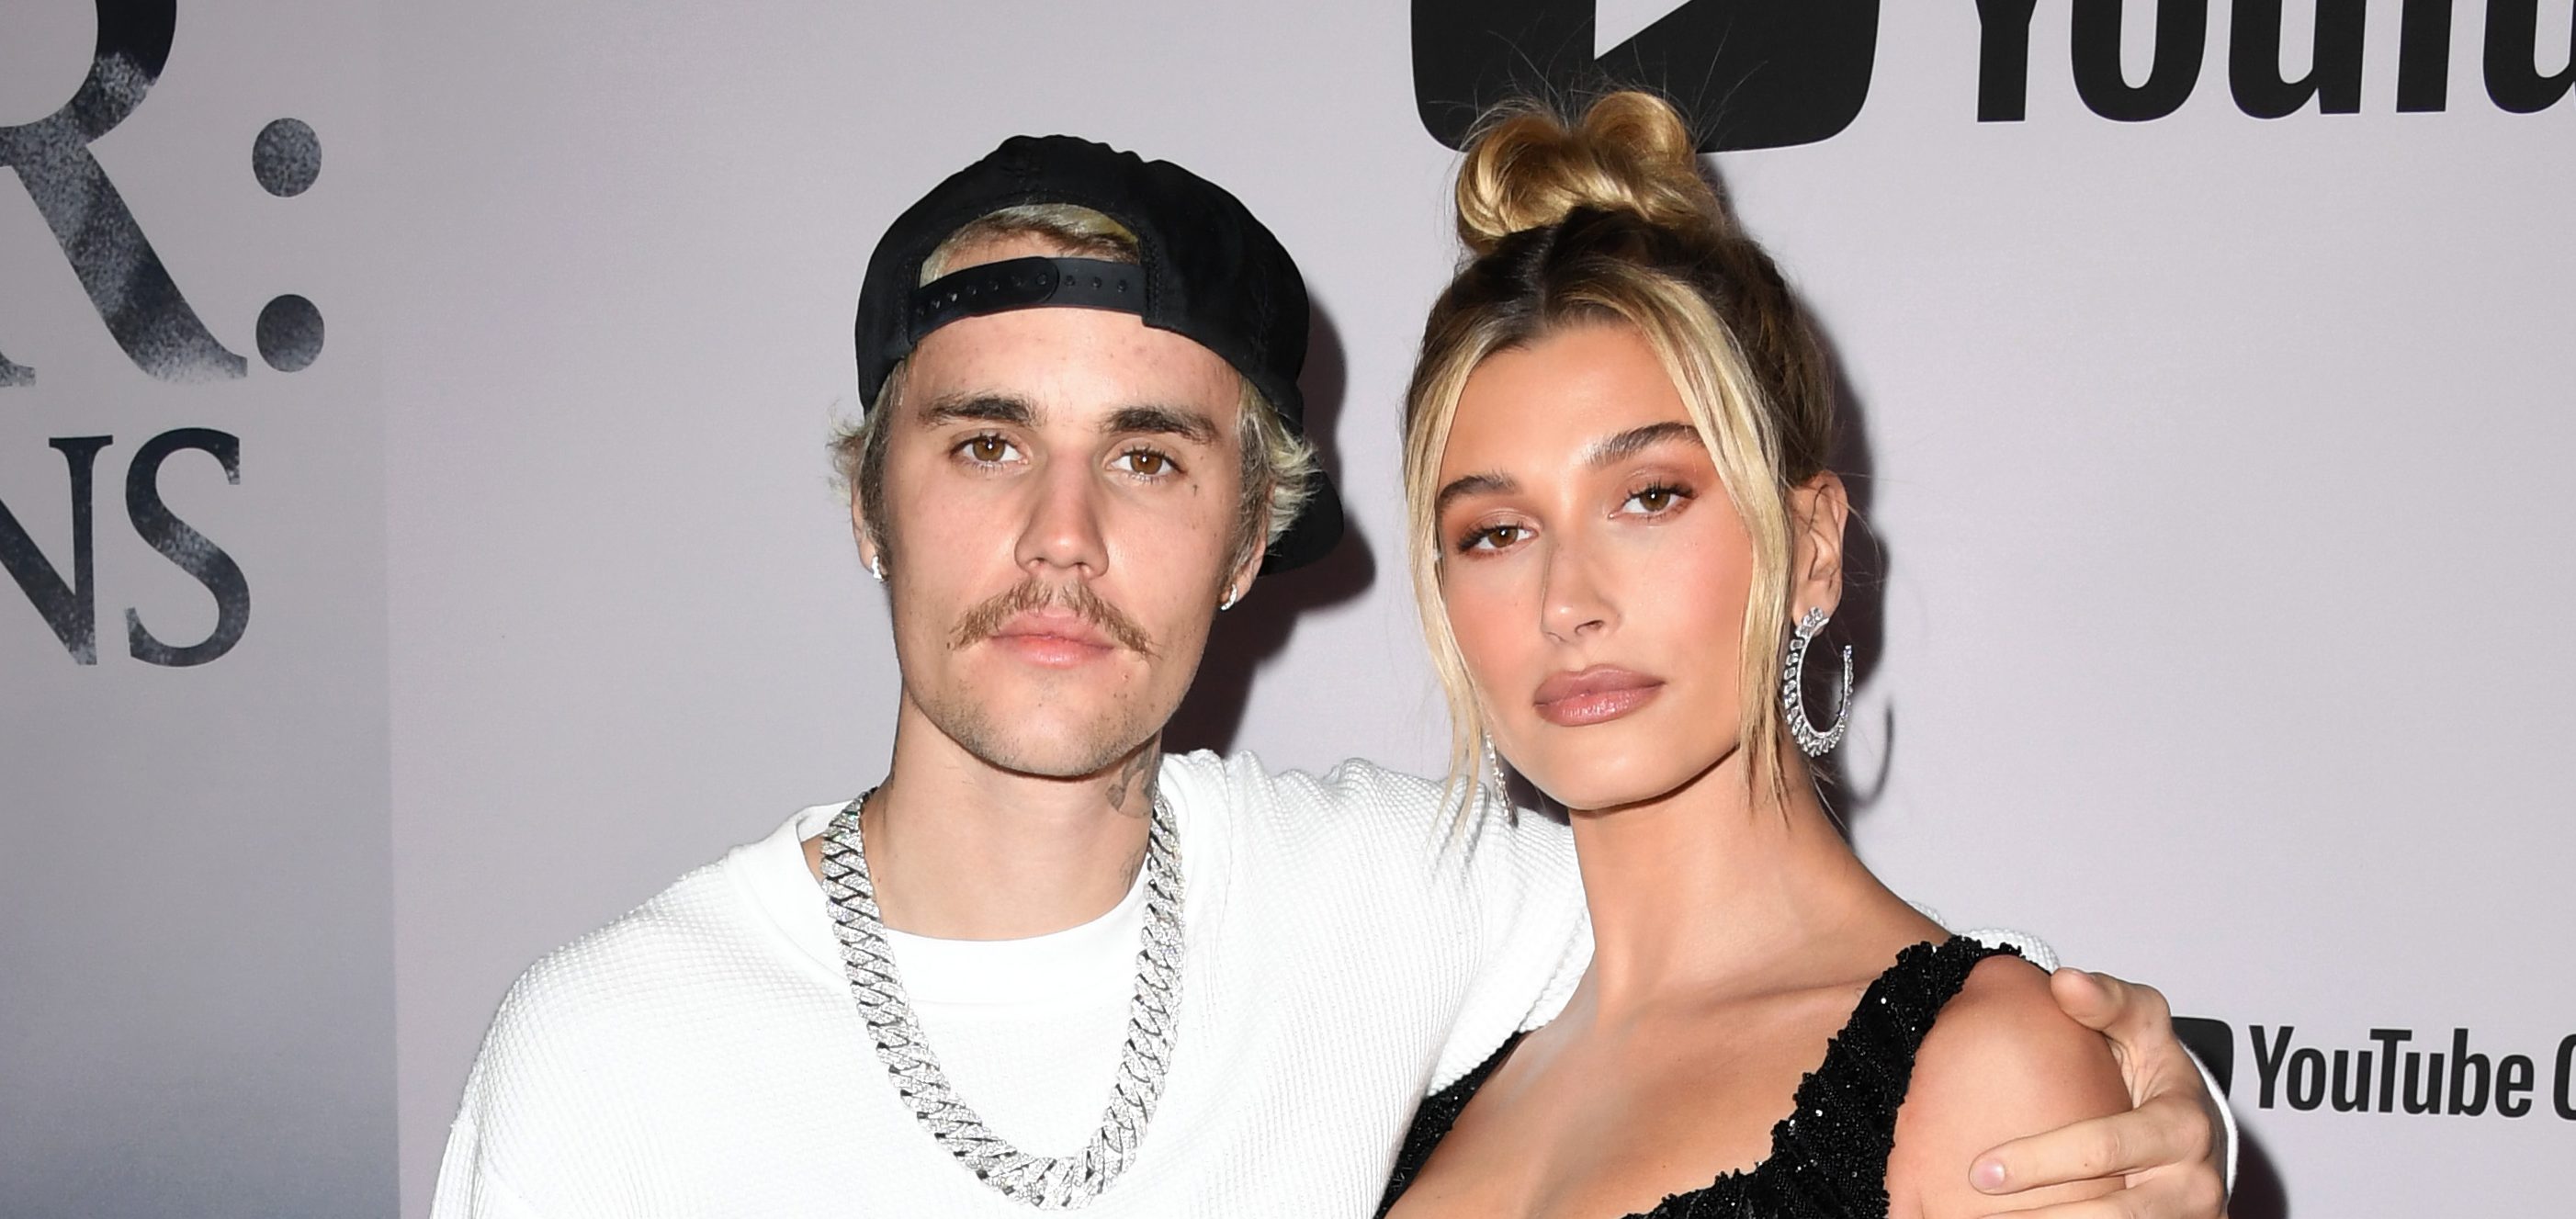 Why Justin Bieber And Wife Hailey Baldwin Waited A Year For Their Wedding